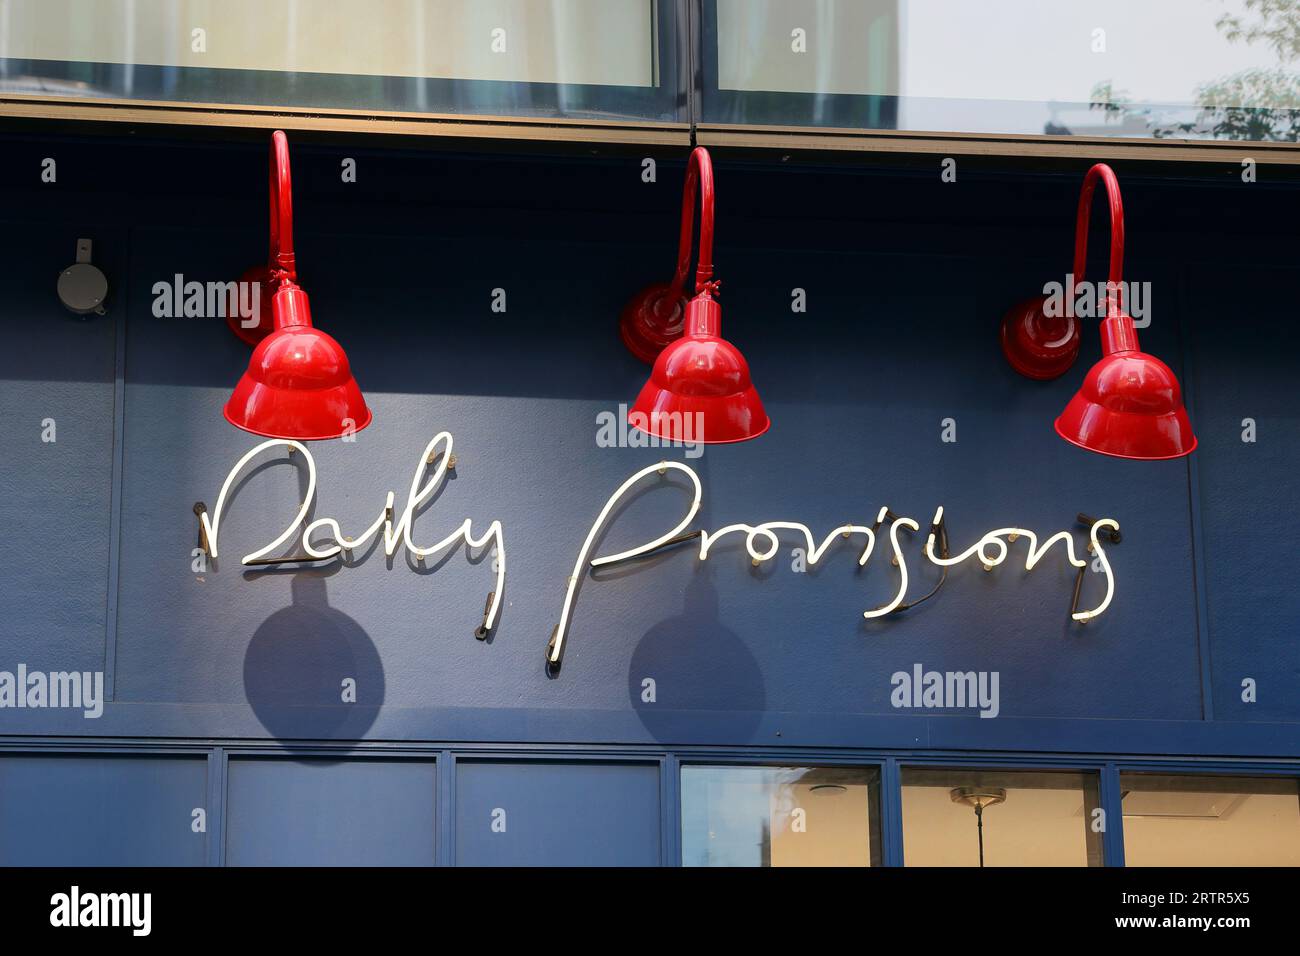 Signage for Daily Provisions, a fast casual cafe from Danny Meyers Union Square Hospitality Group, at Hudson Yards, New York City Stock Photo